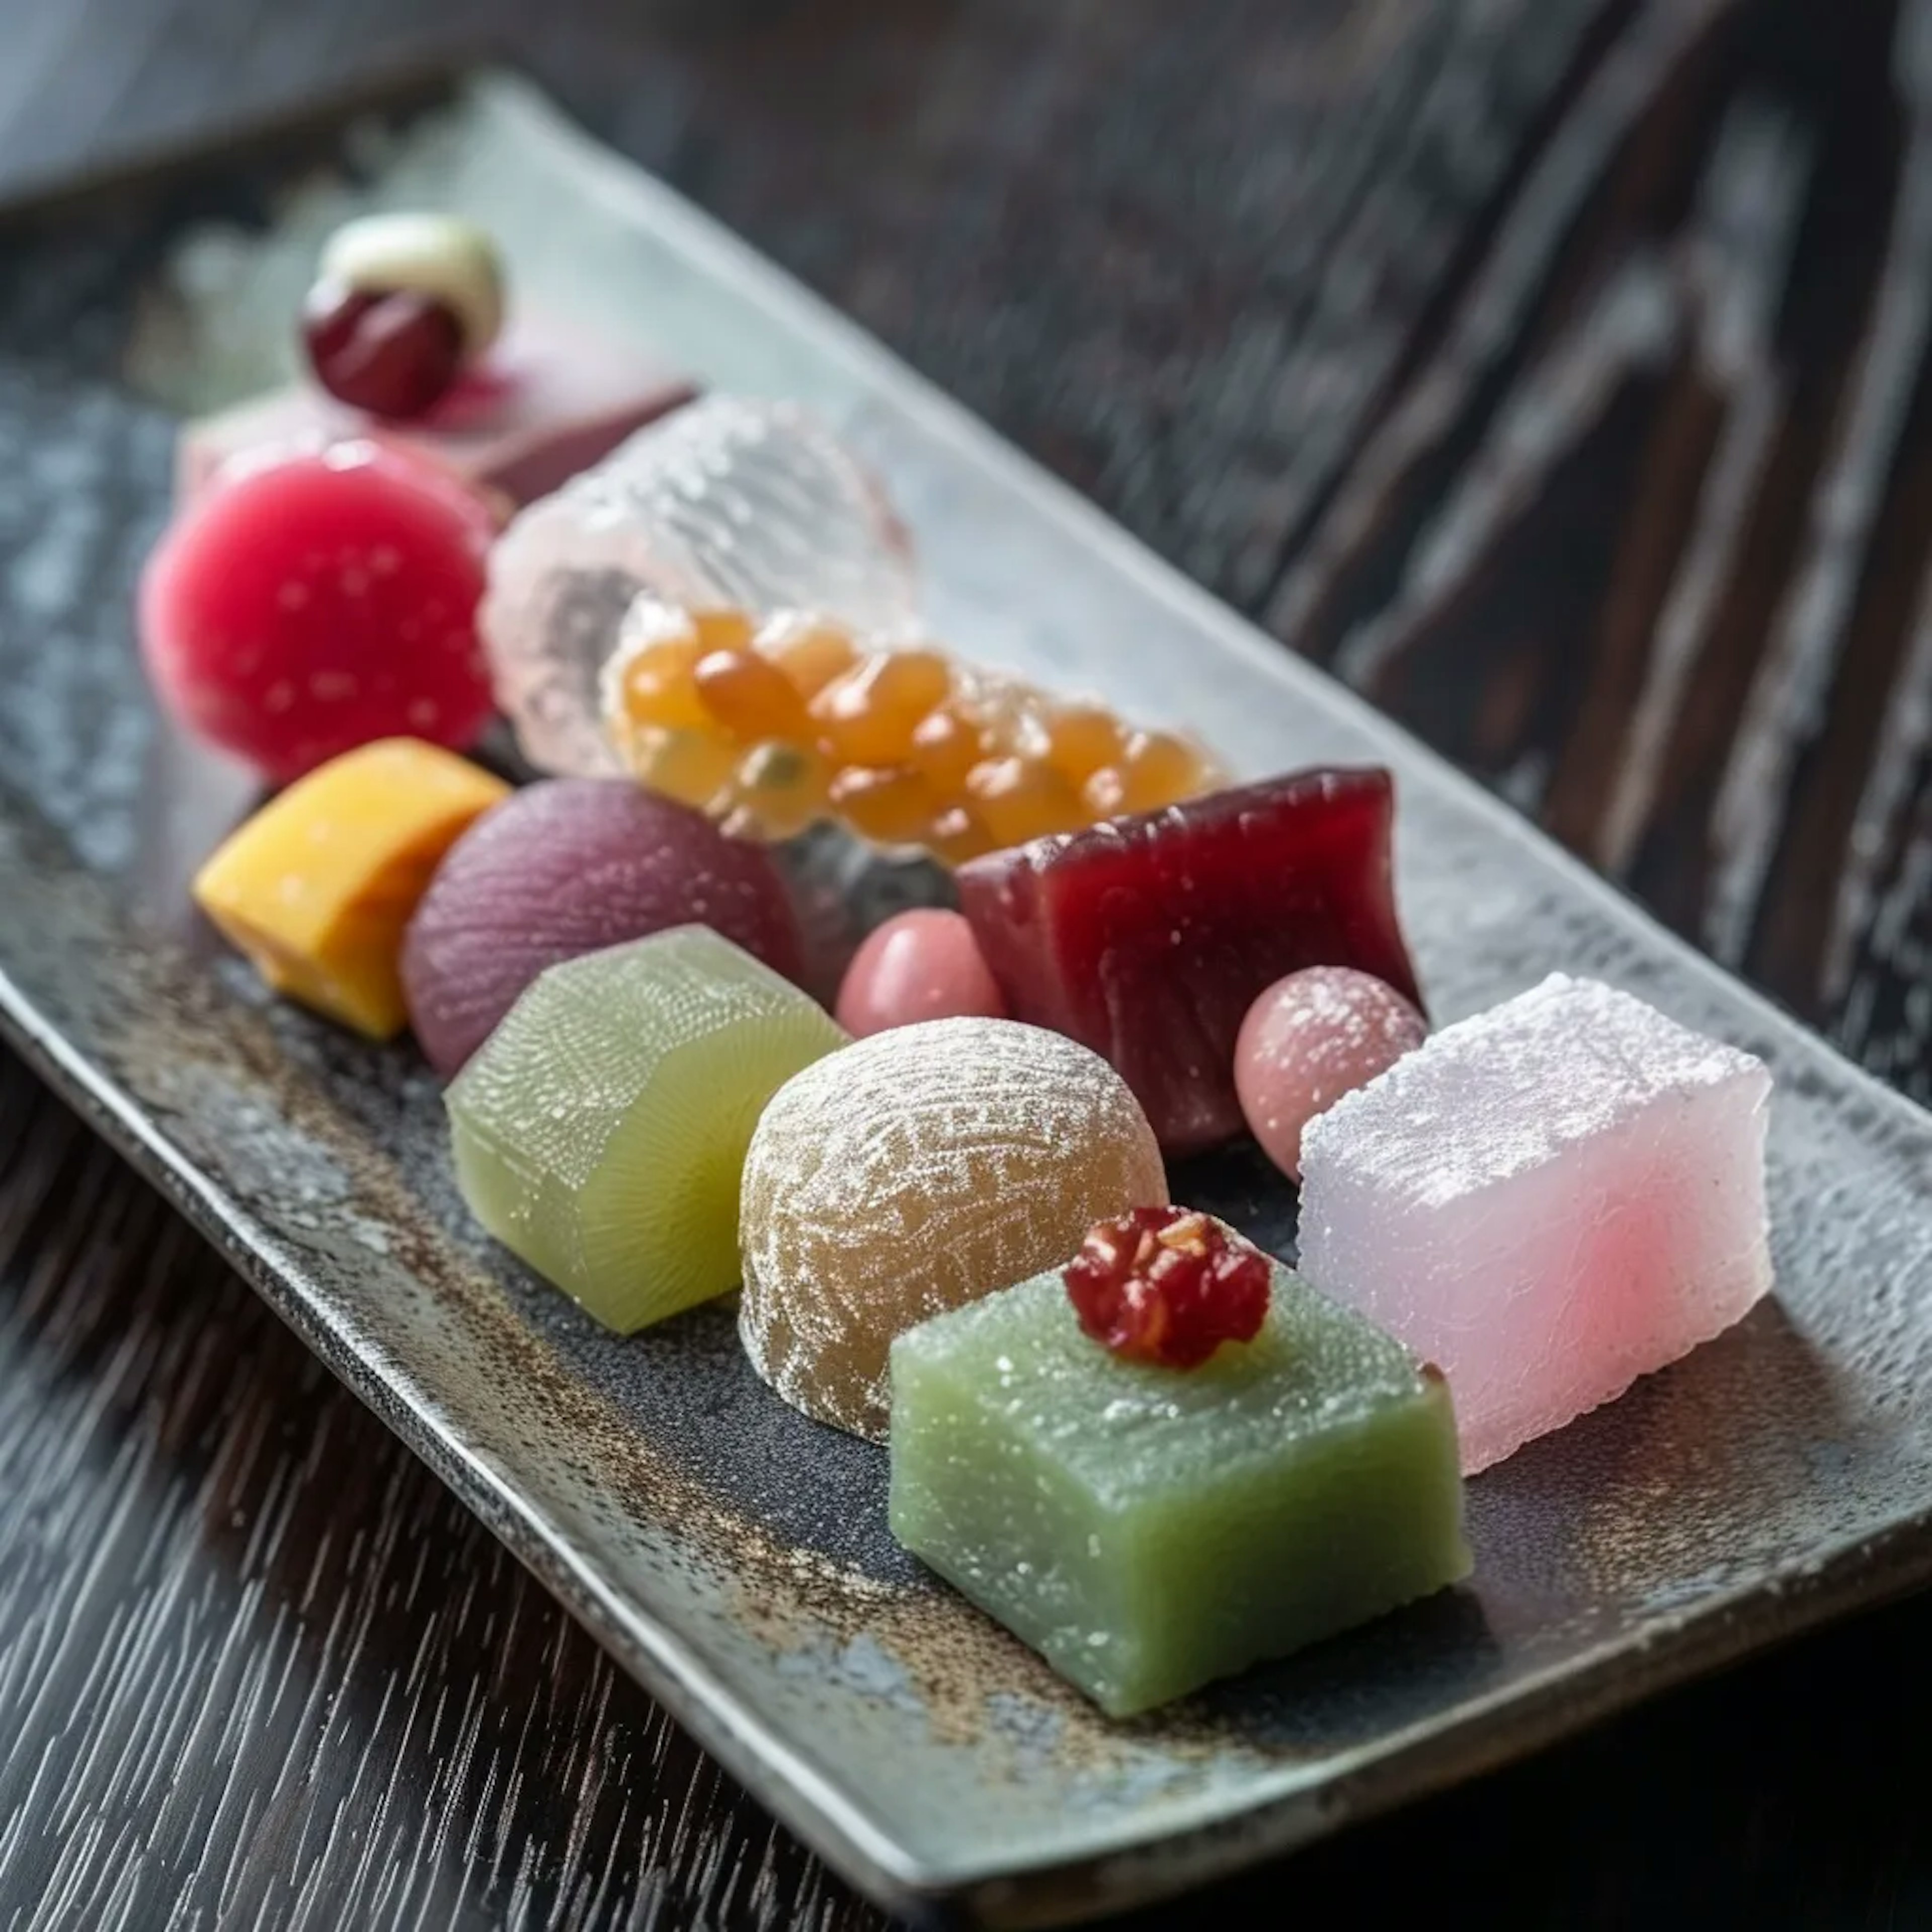 undefined-https://d3nrav7vo3lya8.cloudfront.net/profile_photos/japanese-sweets/144p.webp